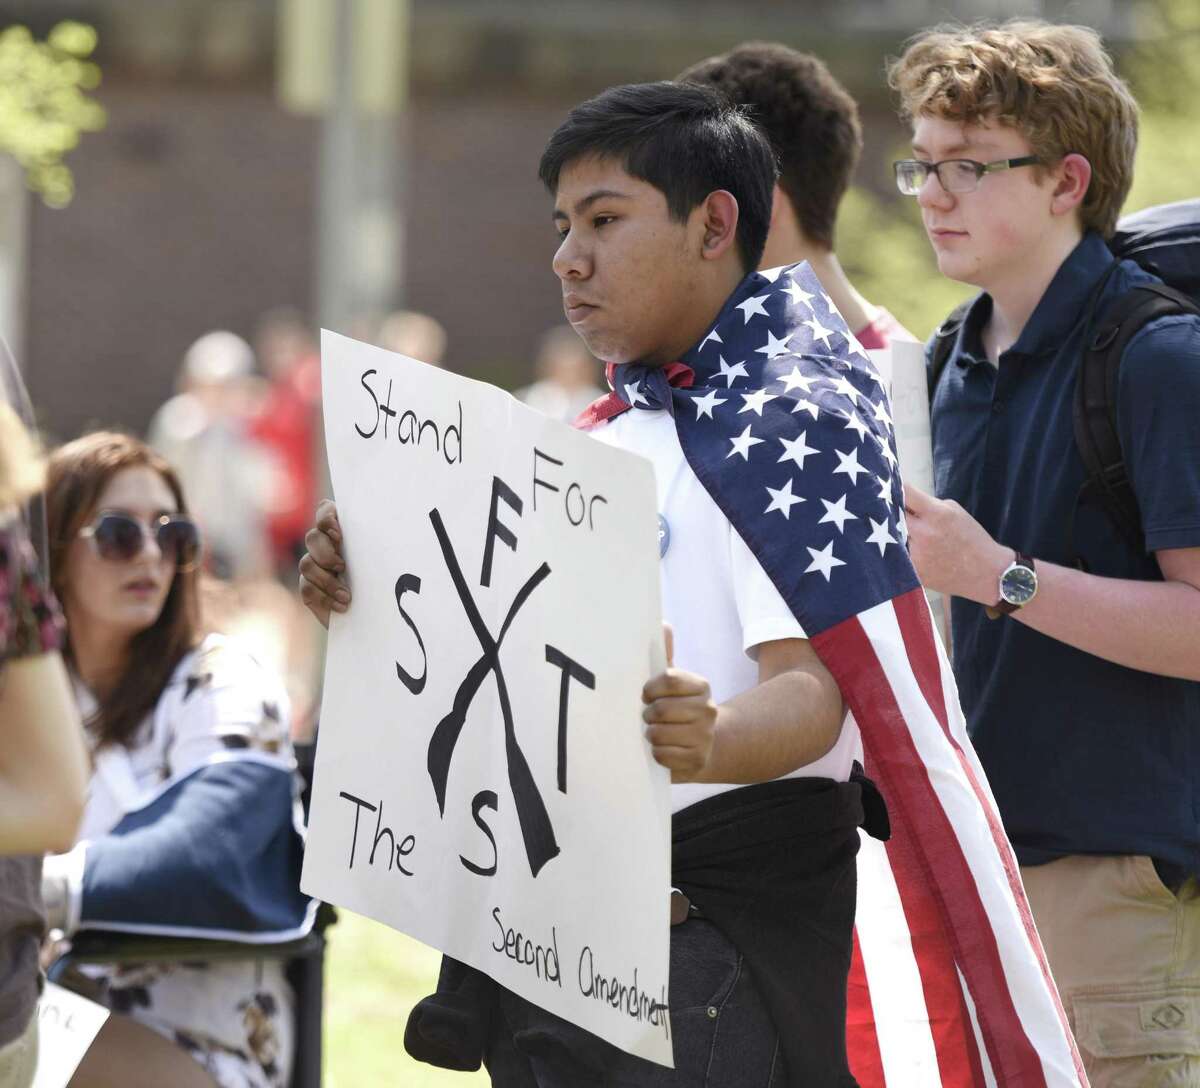 Sophomore Adrian Martinez dons an American flag and displays a sign during a pro-gun walkout at Greenwich High School in Greenwich, Conn. Wednesday, May 2, 2018. About a dozen students walked out of Greenwich High School armed with signs to make their voices heard and show support of the second amendment.